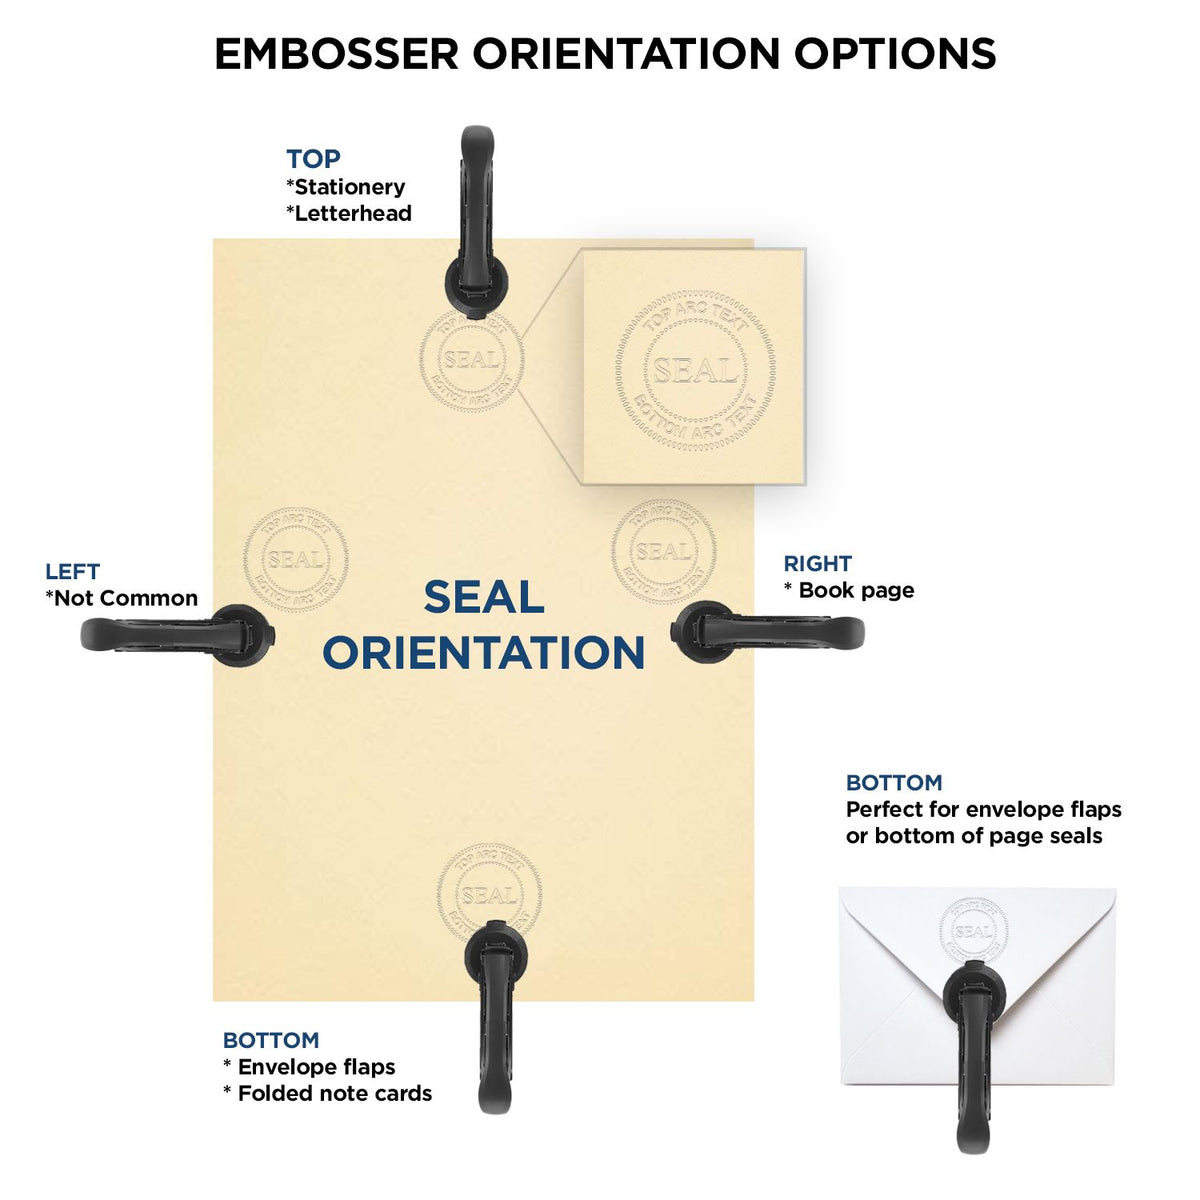 An infographic for the Louisiana Engineer Desk Seal showing embosser orientation, this is showing examples of a top, bottom, right and left insert.